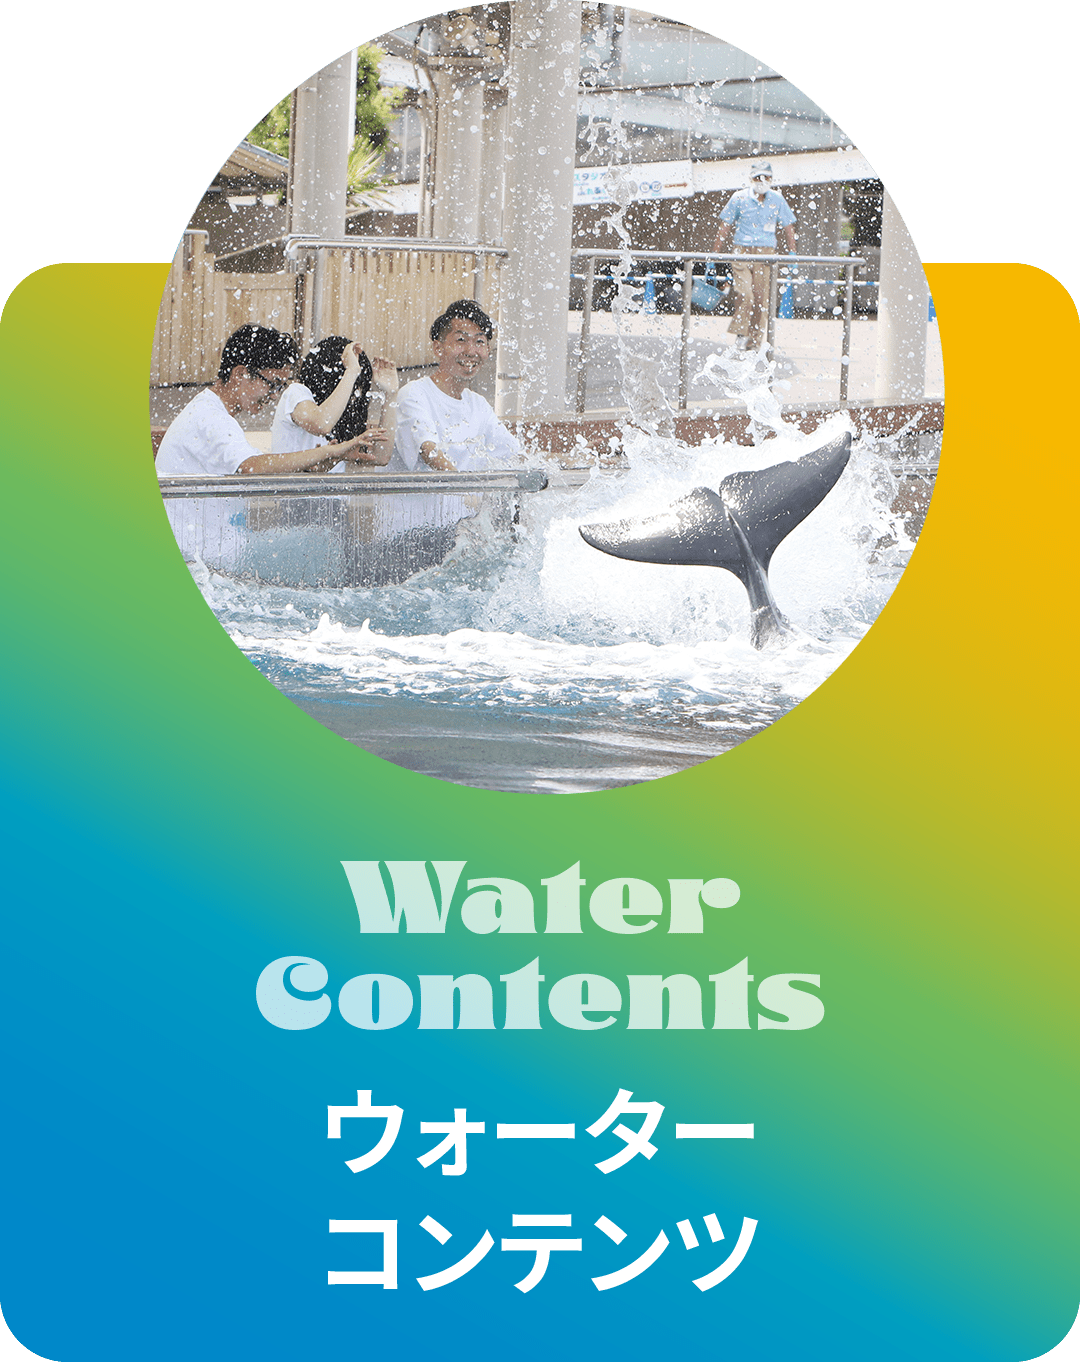 WATERu0026MUSIC FES. Supported by ナタリー スペシャルコラボ アイナ・ジ・エンド | 横浜・八景島シーパラダイス